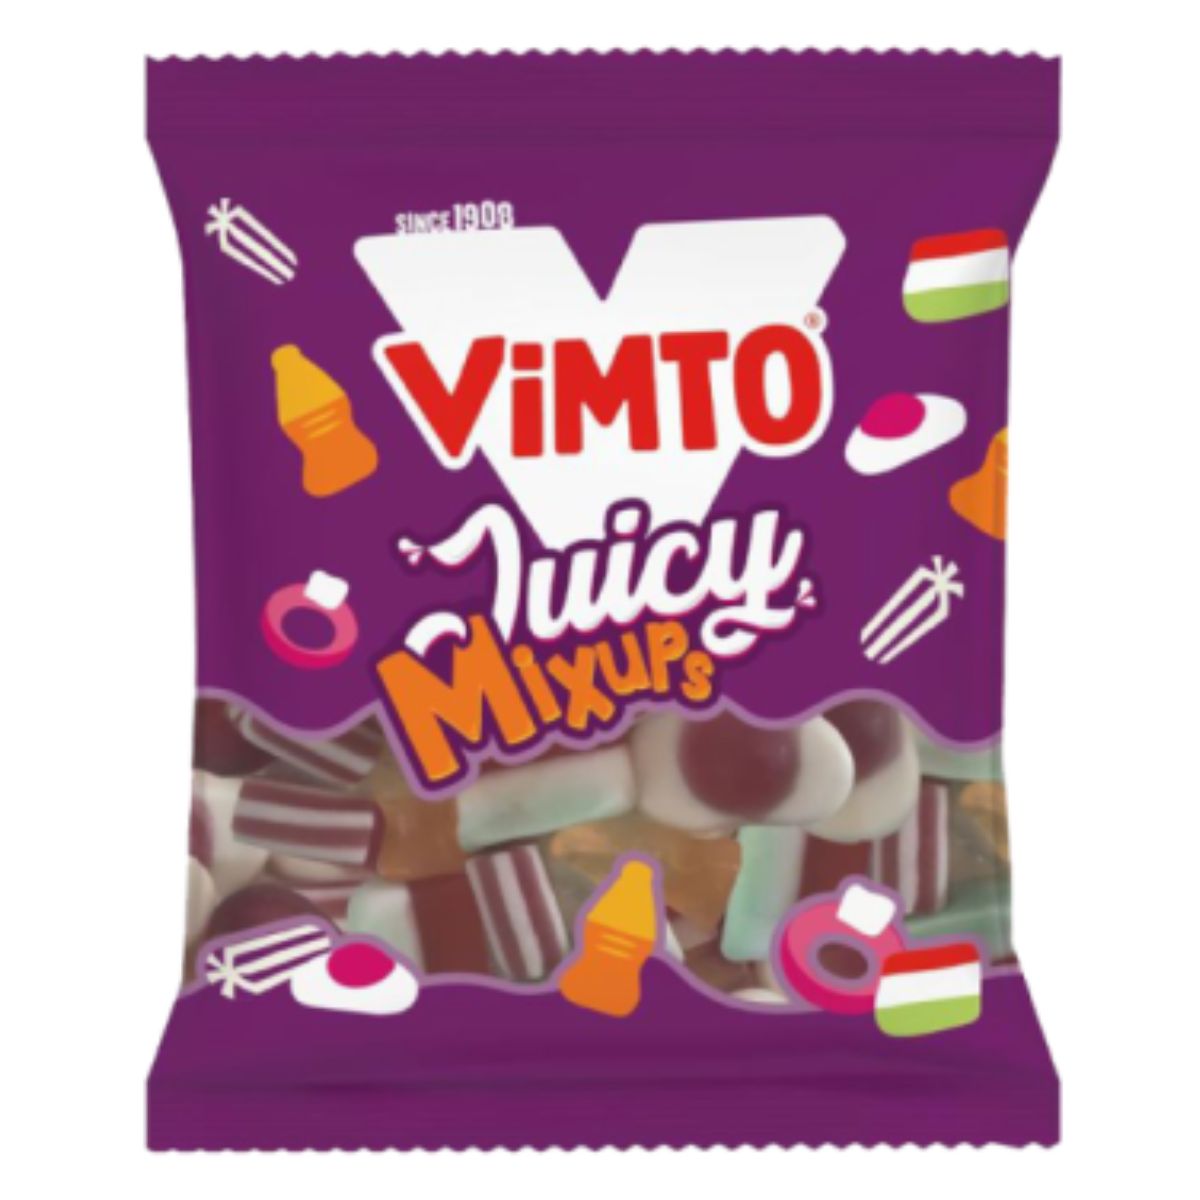 A package of "Vimto - Juicy Mixups - 130g" candies featuring various shapes and colors.